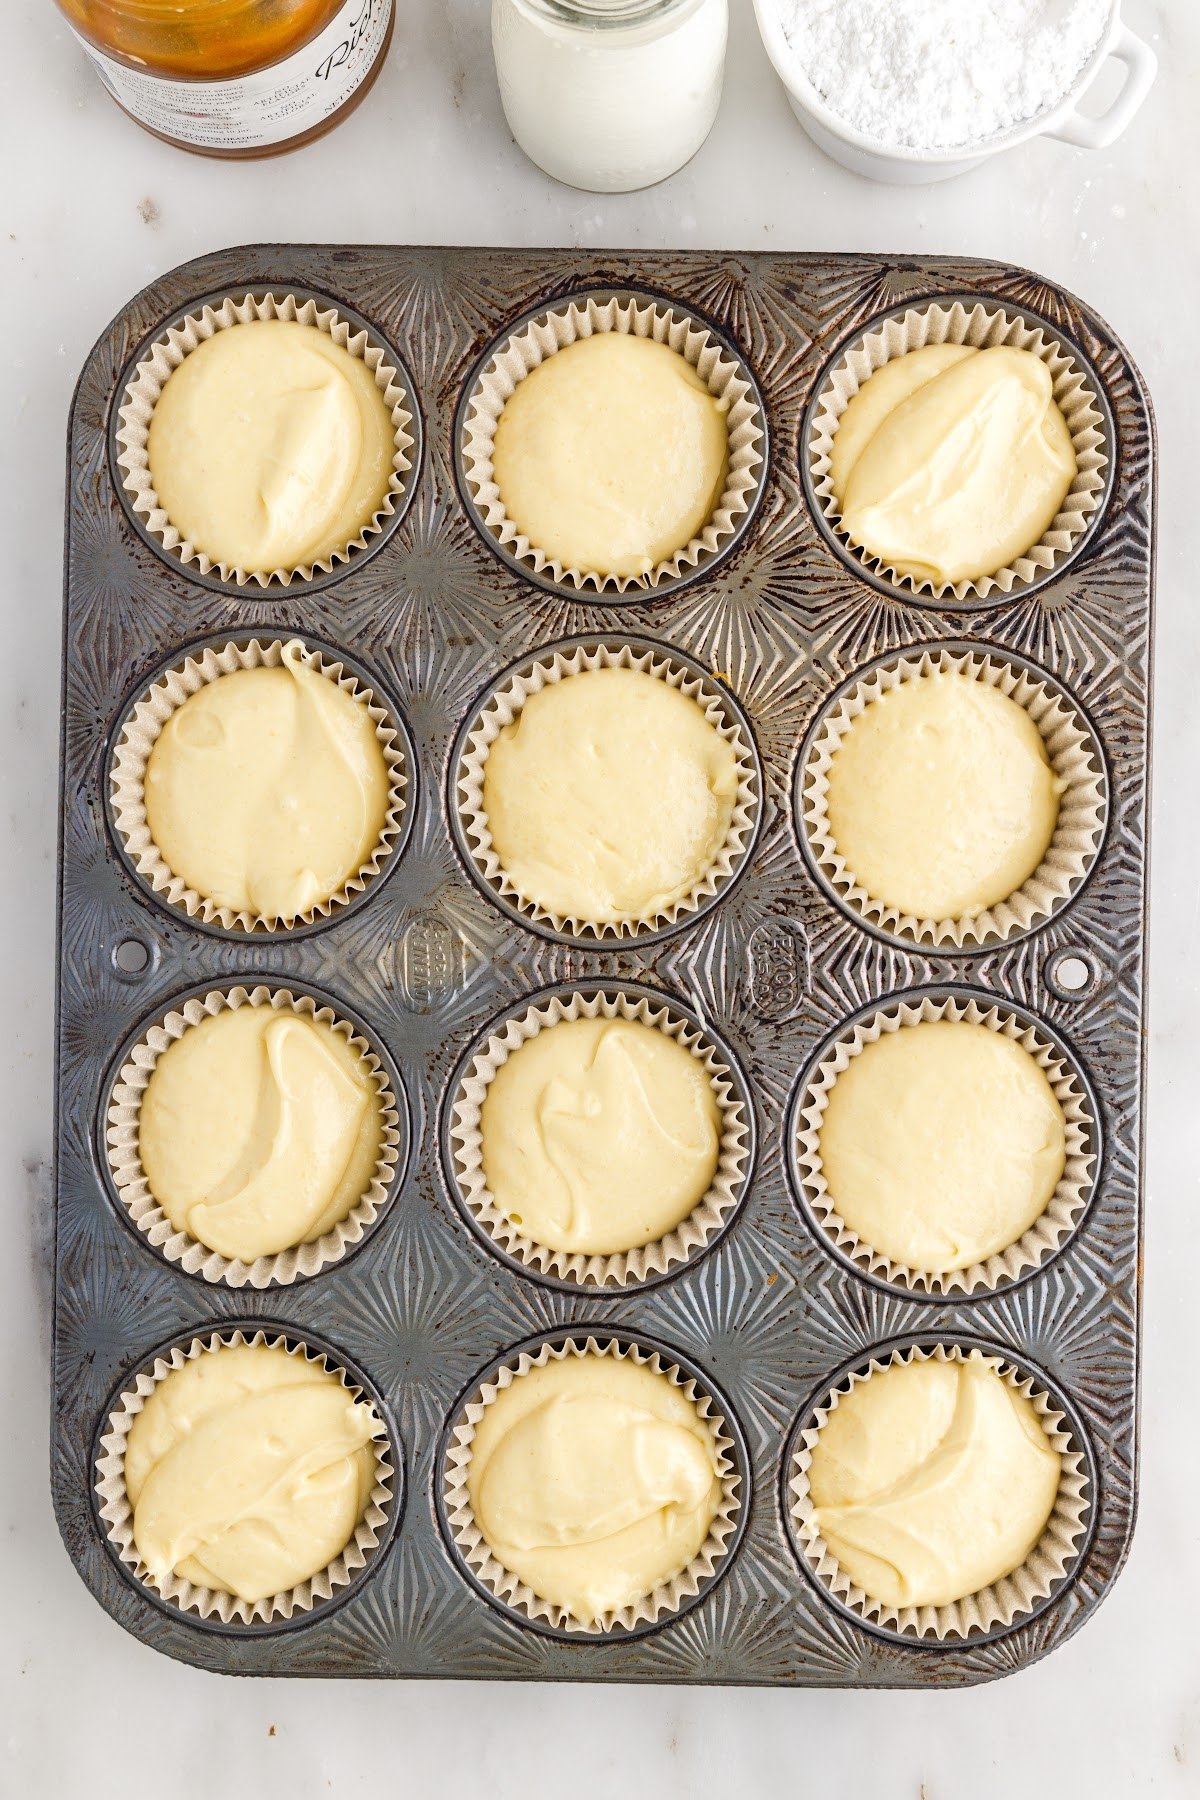 Poured cake batter into the cupcake liners.